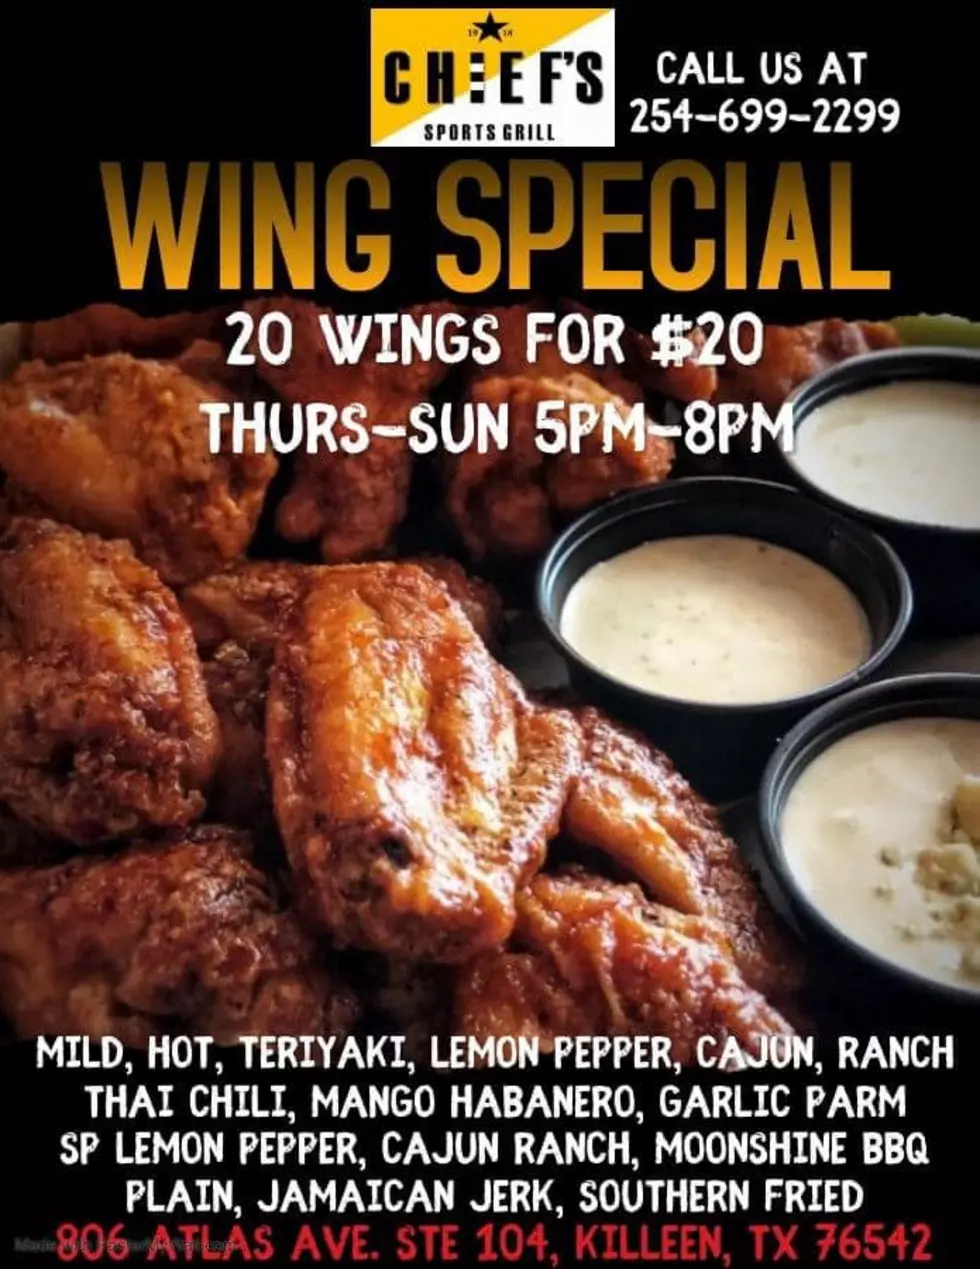 Try The Wings At Chiefs Sports Grill, And Come Out For Thursday Night Karaoke with B106